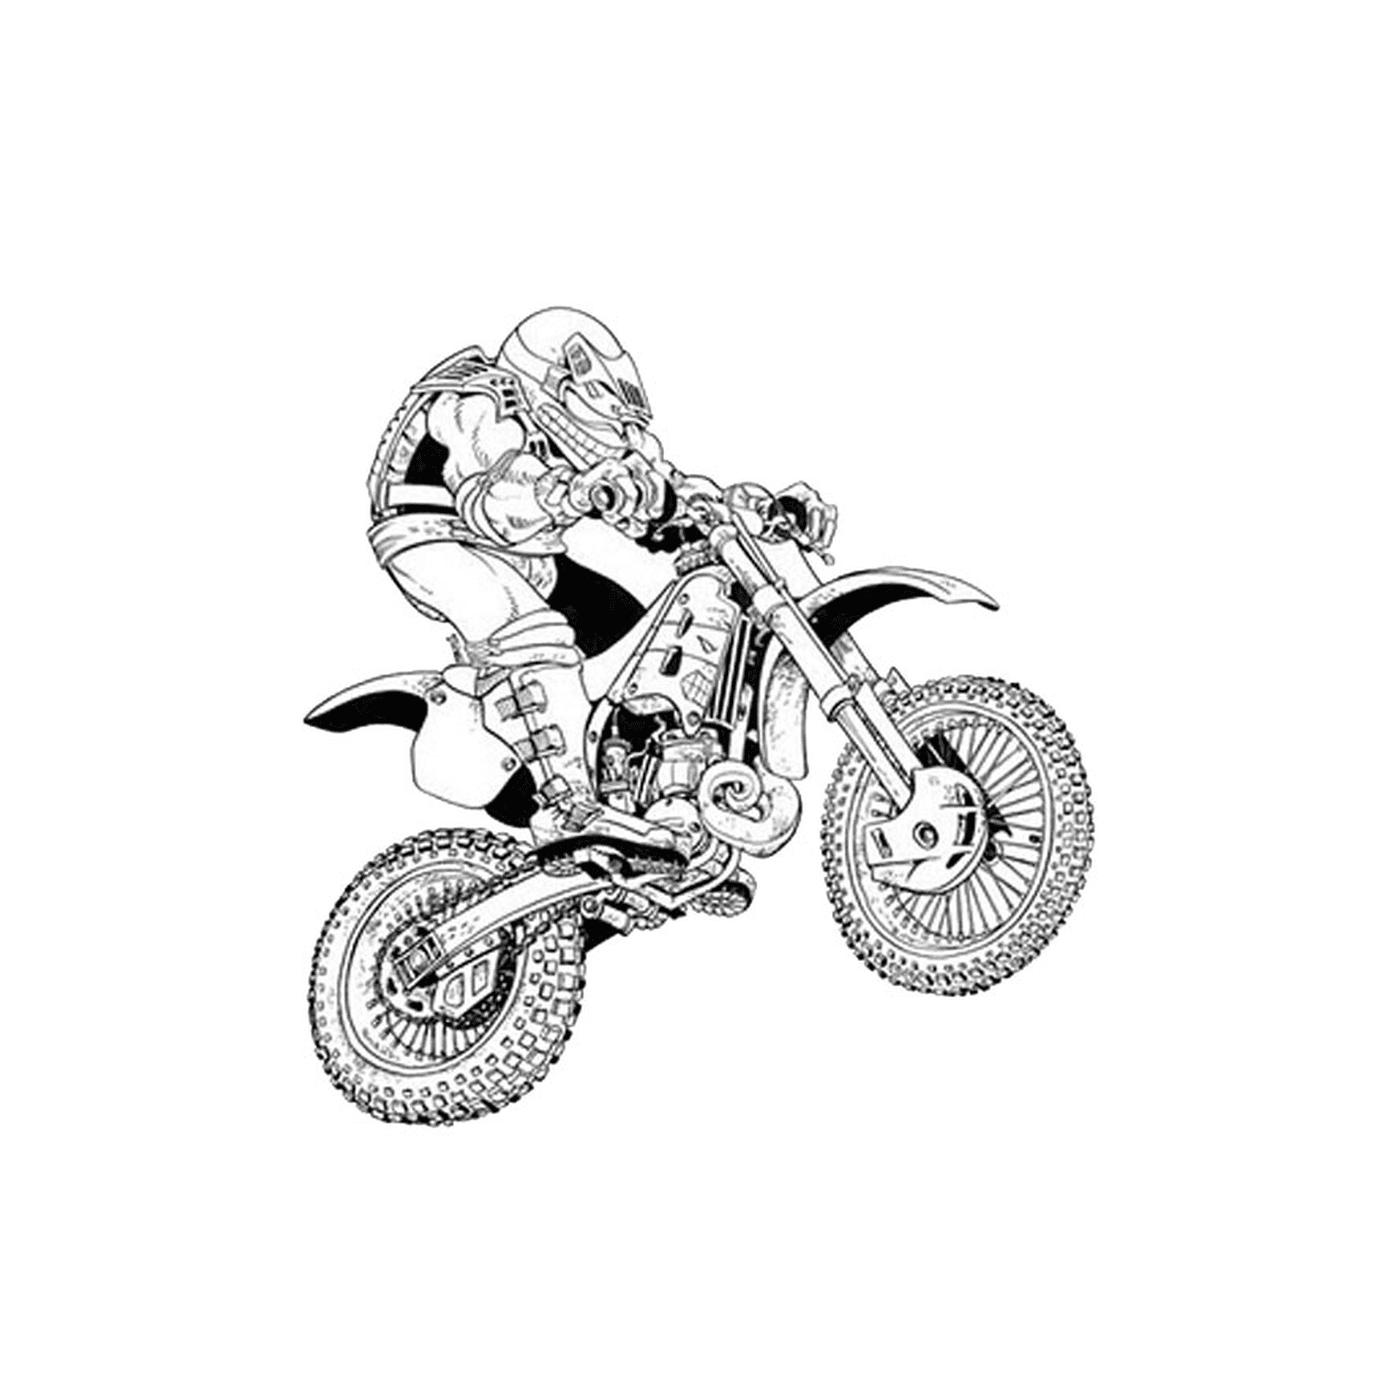  person on a powerful motorcycle 